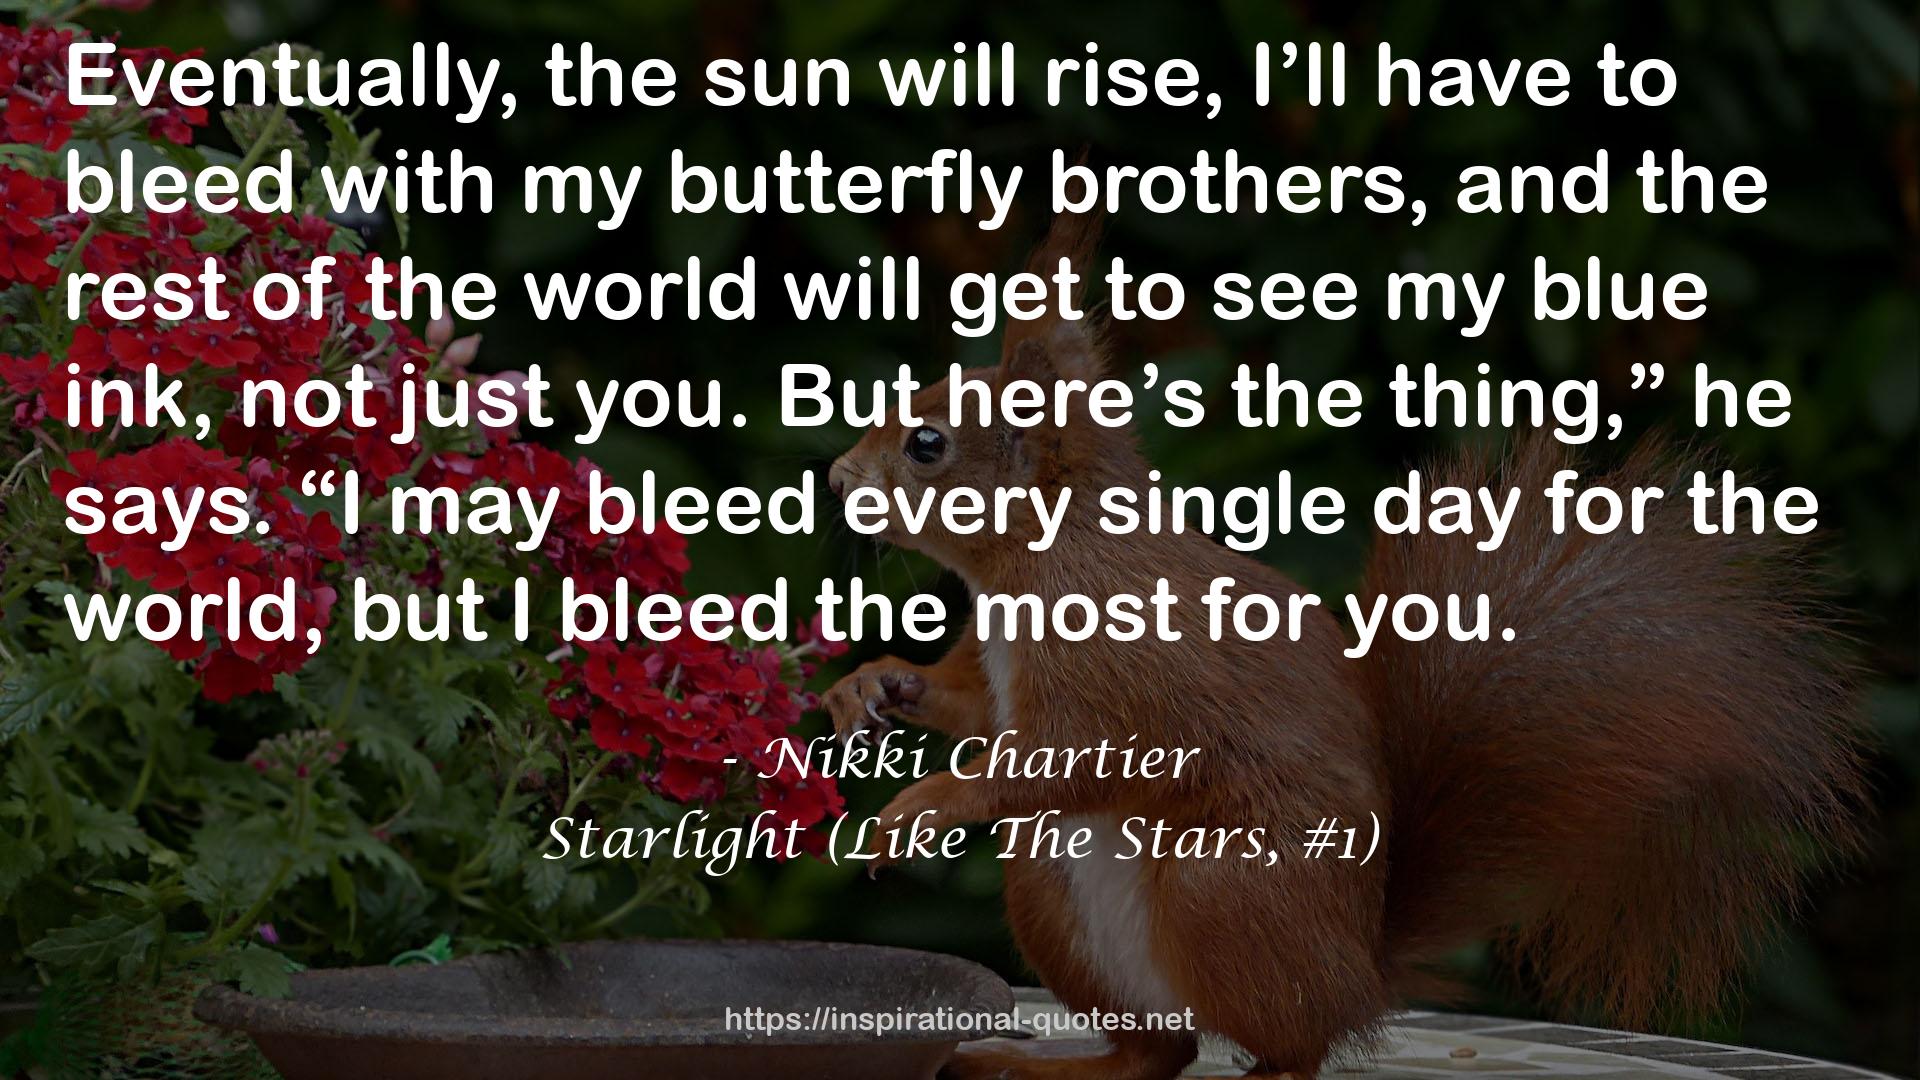 Starlight (Like The Stars, #1) QUOTES